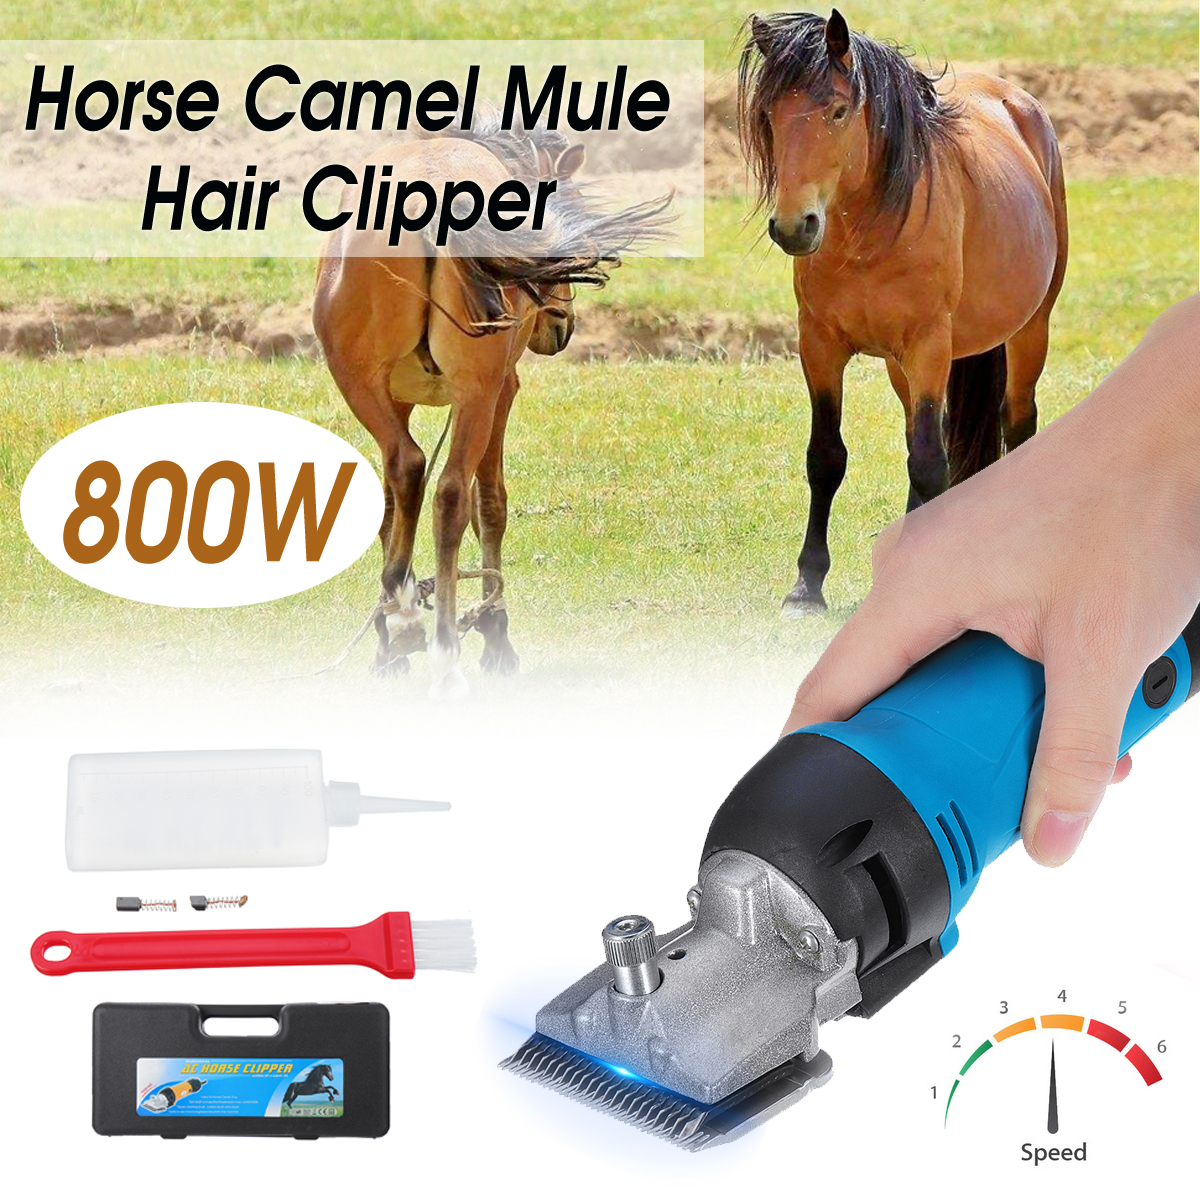 Heavy-Duty-Electric-Horse-Hair-Clipper-Multi-used-Farm-Shearing-Trimmer-Shaver-6-Speed-Regulated-She-1441907-4